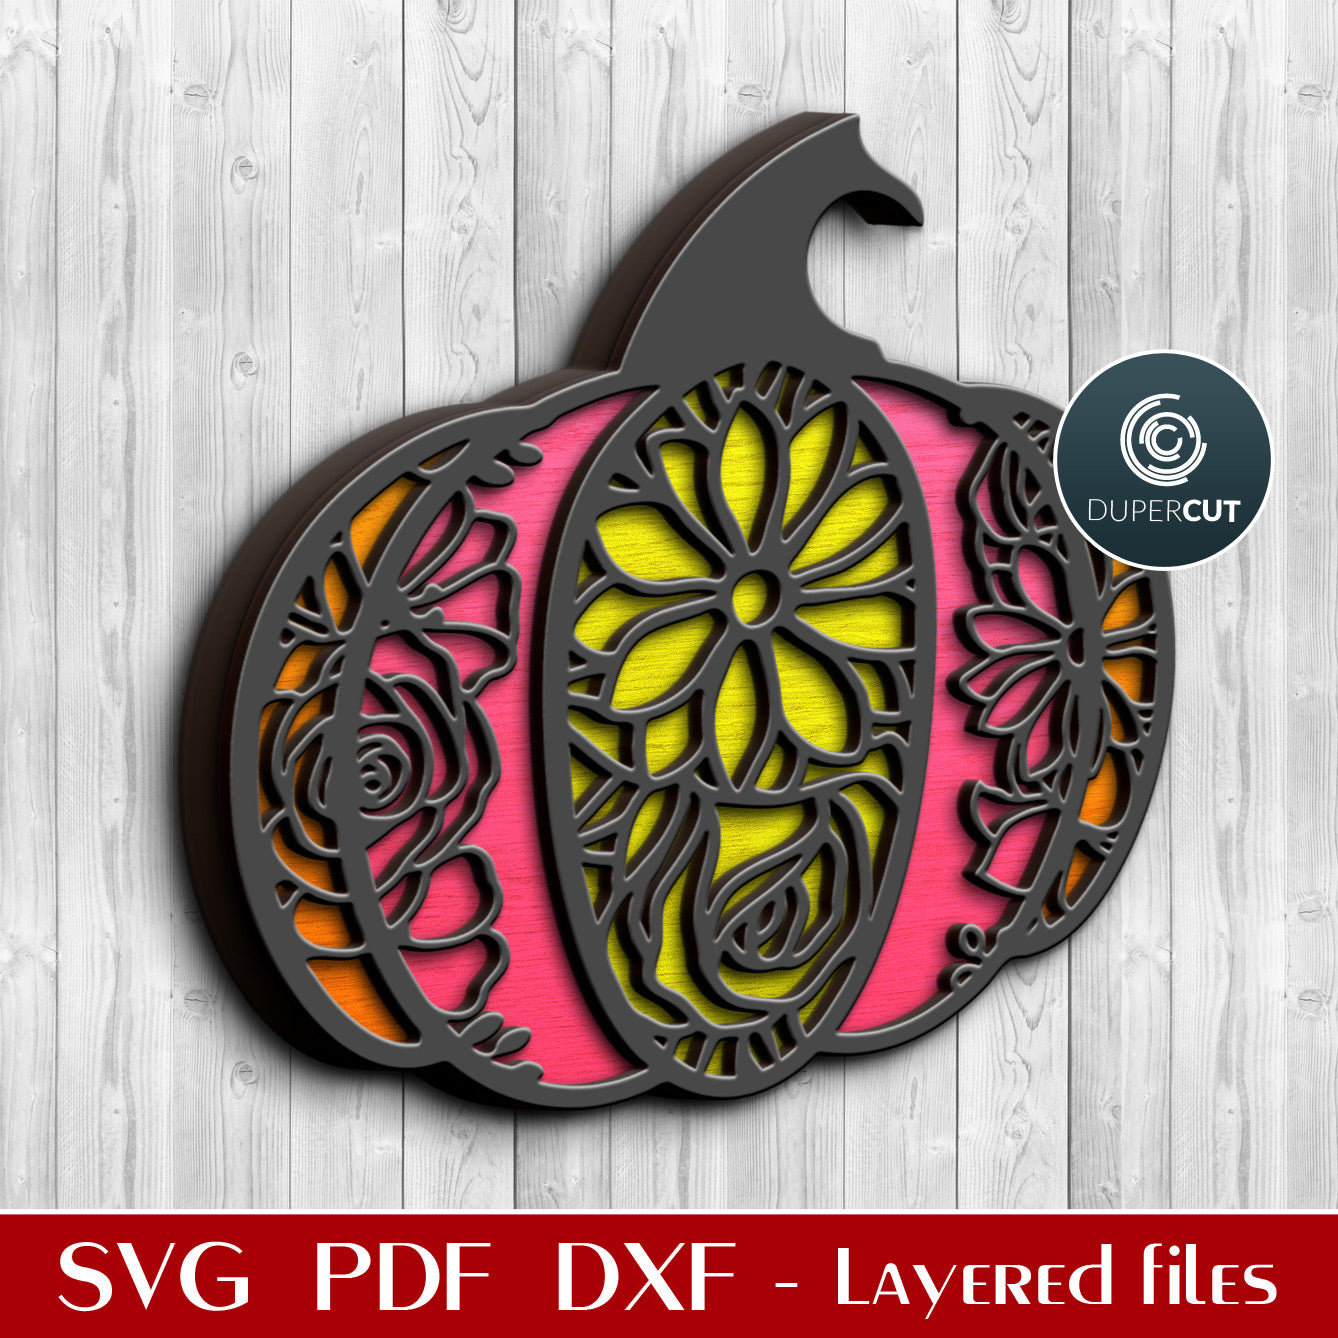 Floral pumpkin SVG PNG DXF layered cutting files for Glowforge, Cricut, Silhouette, laser CNC machines by DuperCut 